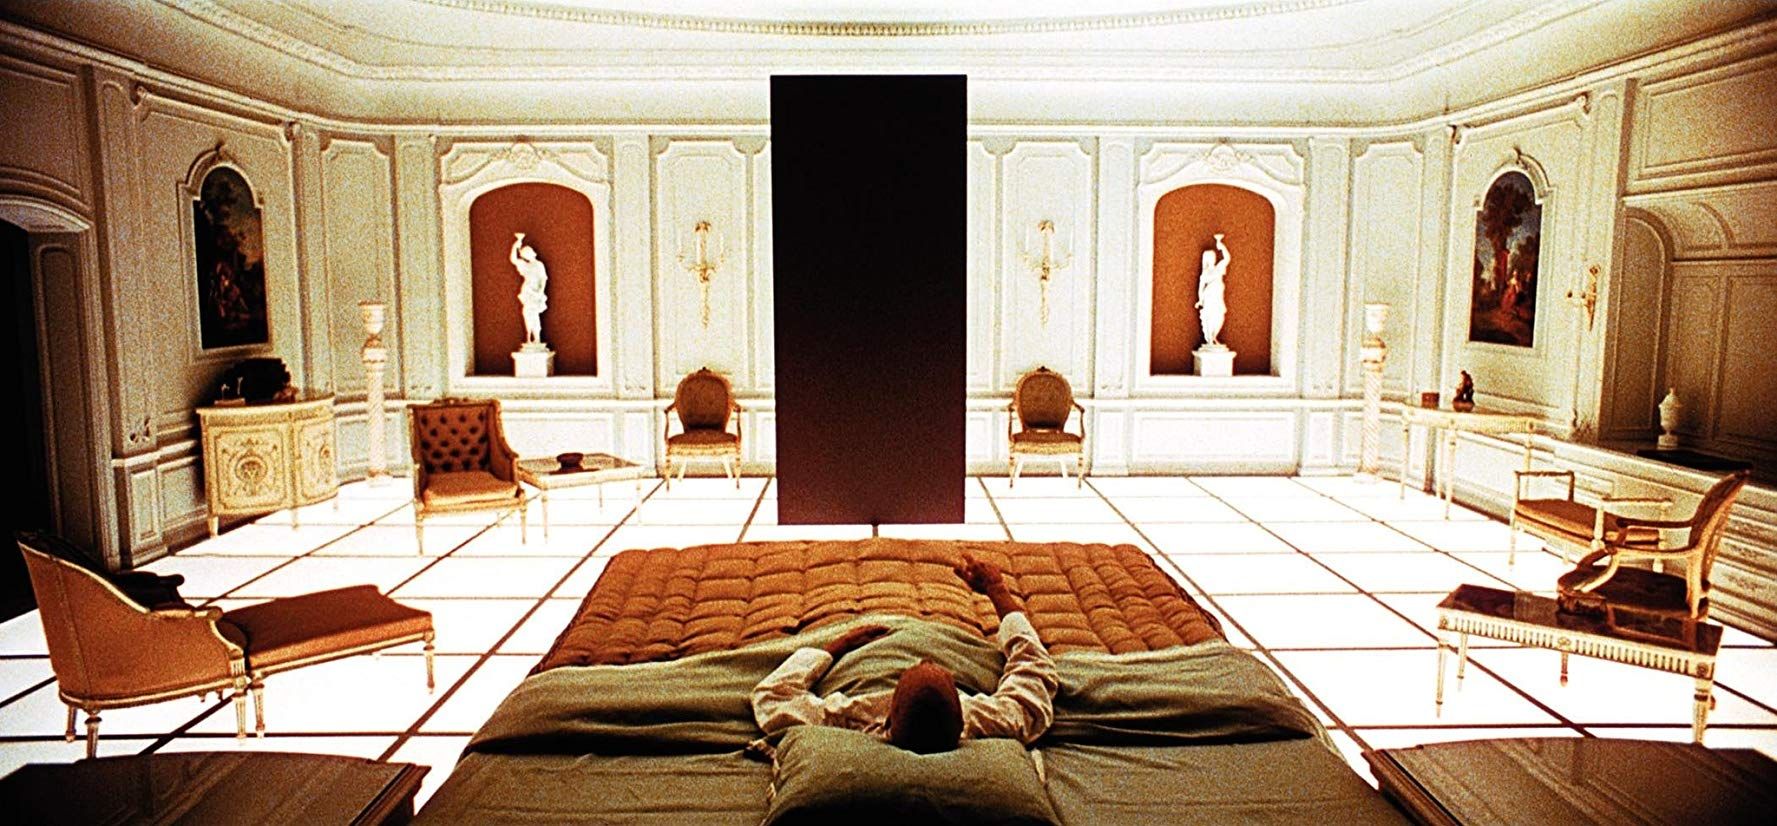 2001-a-space-odyssey-bedroom